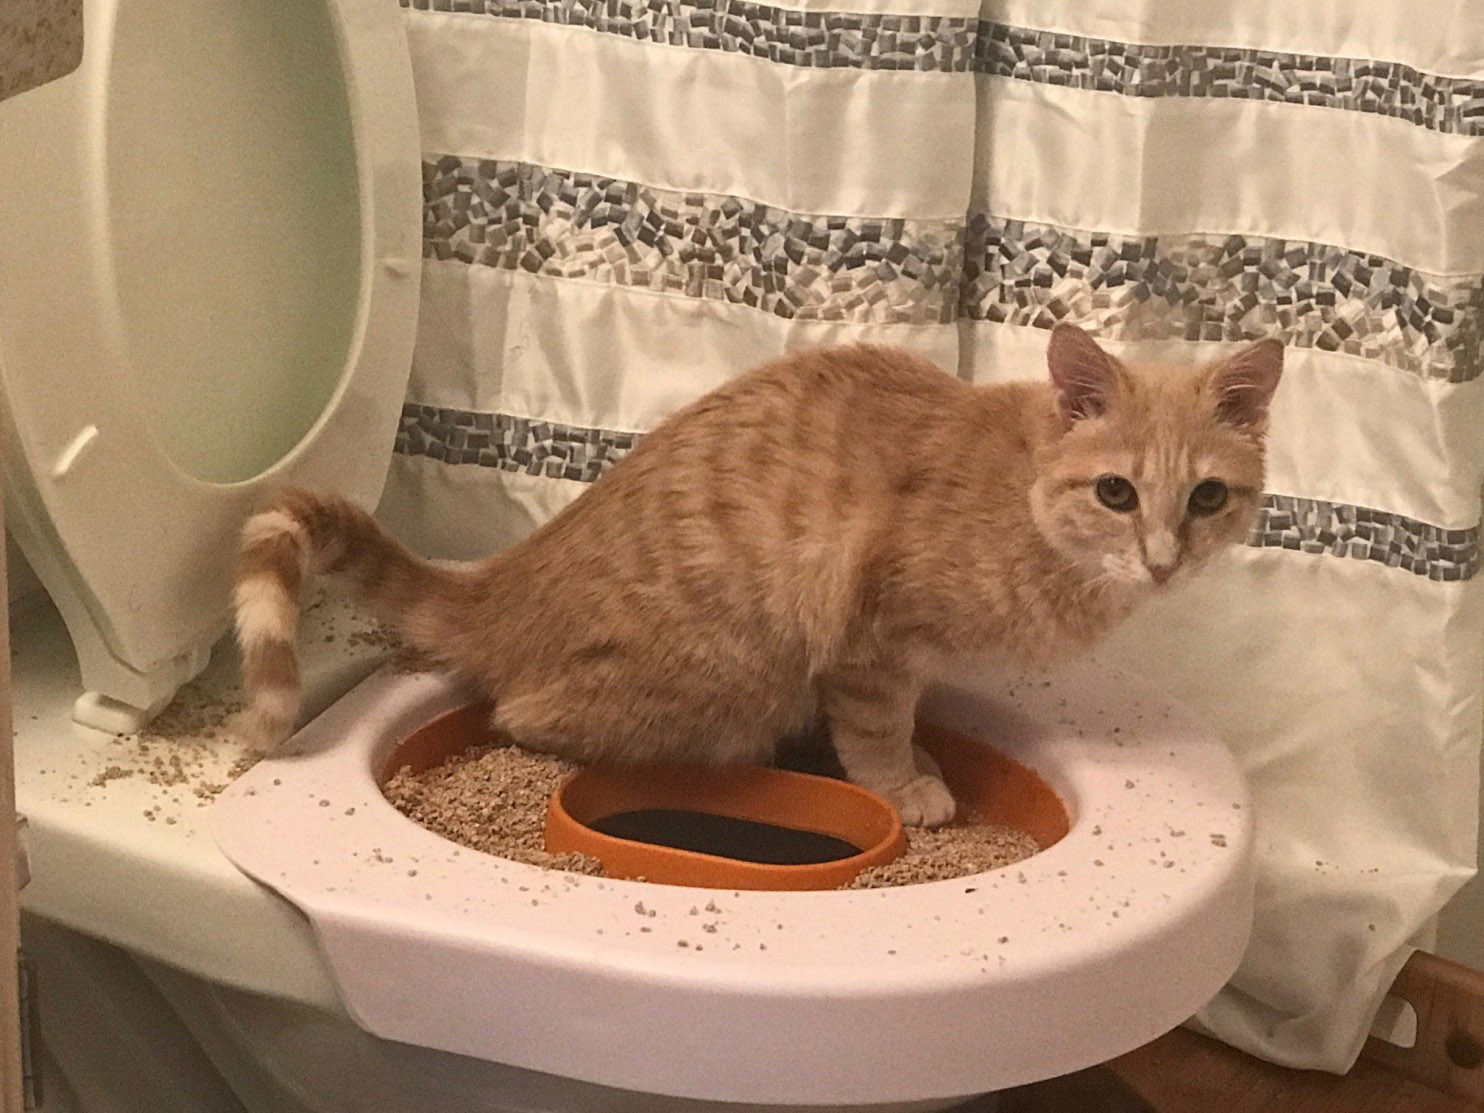 You can train your cat to use the toilet. Just don't expect it to flush